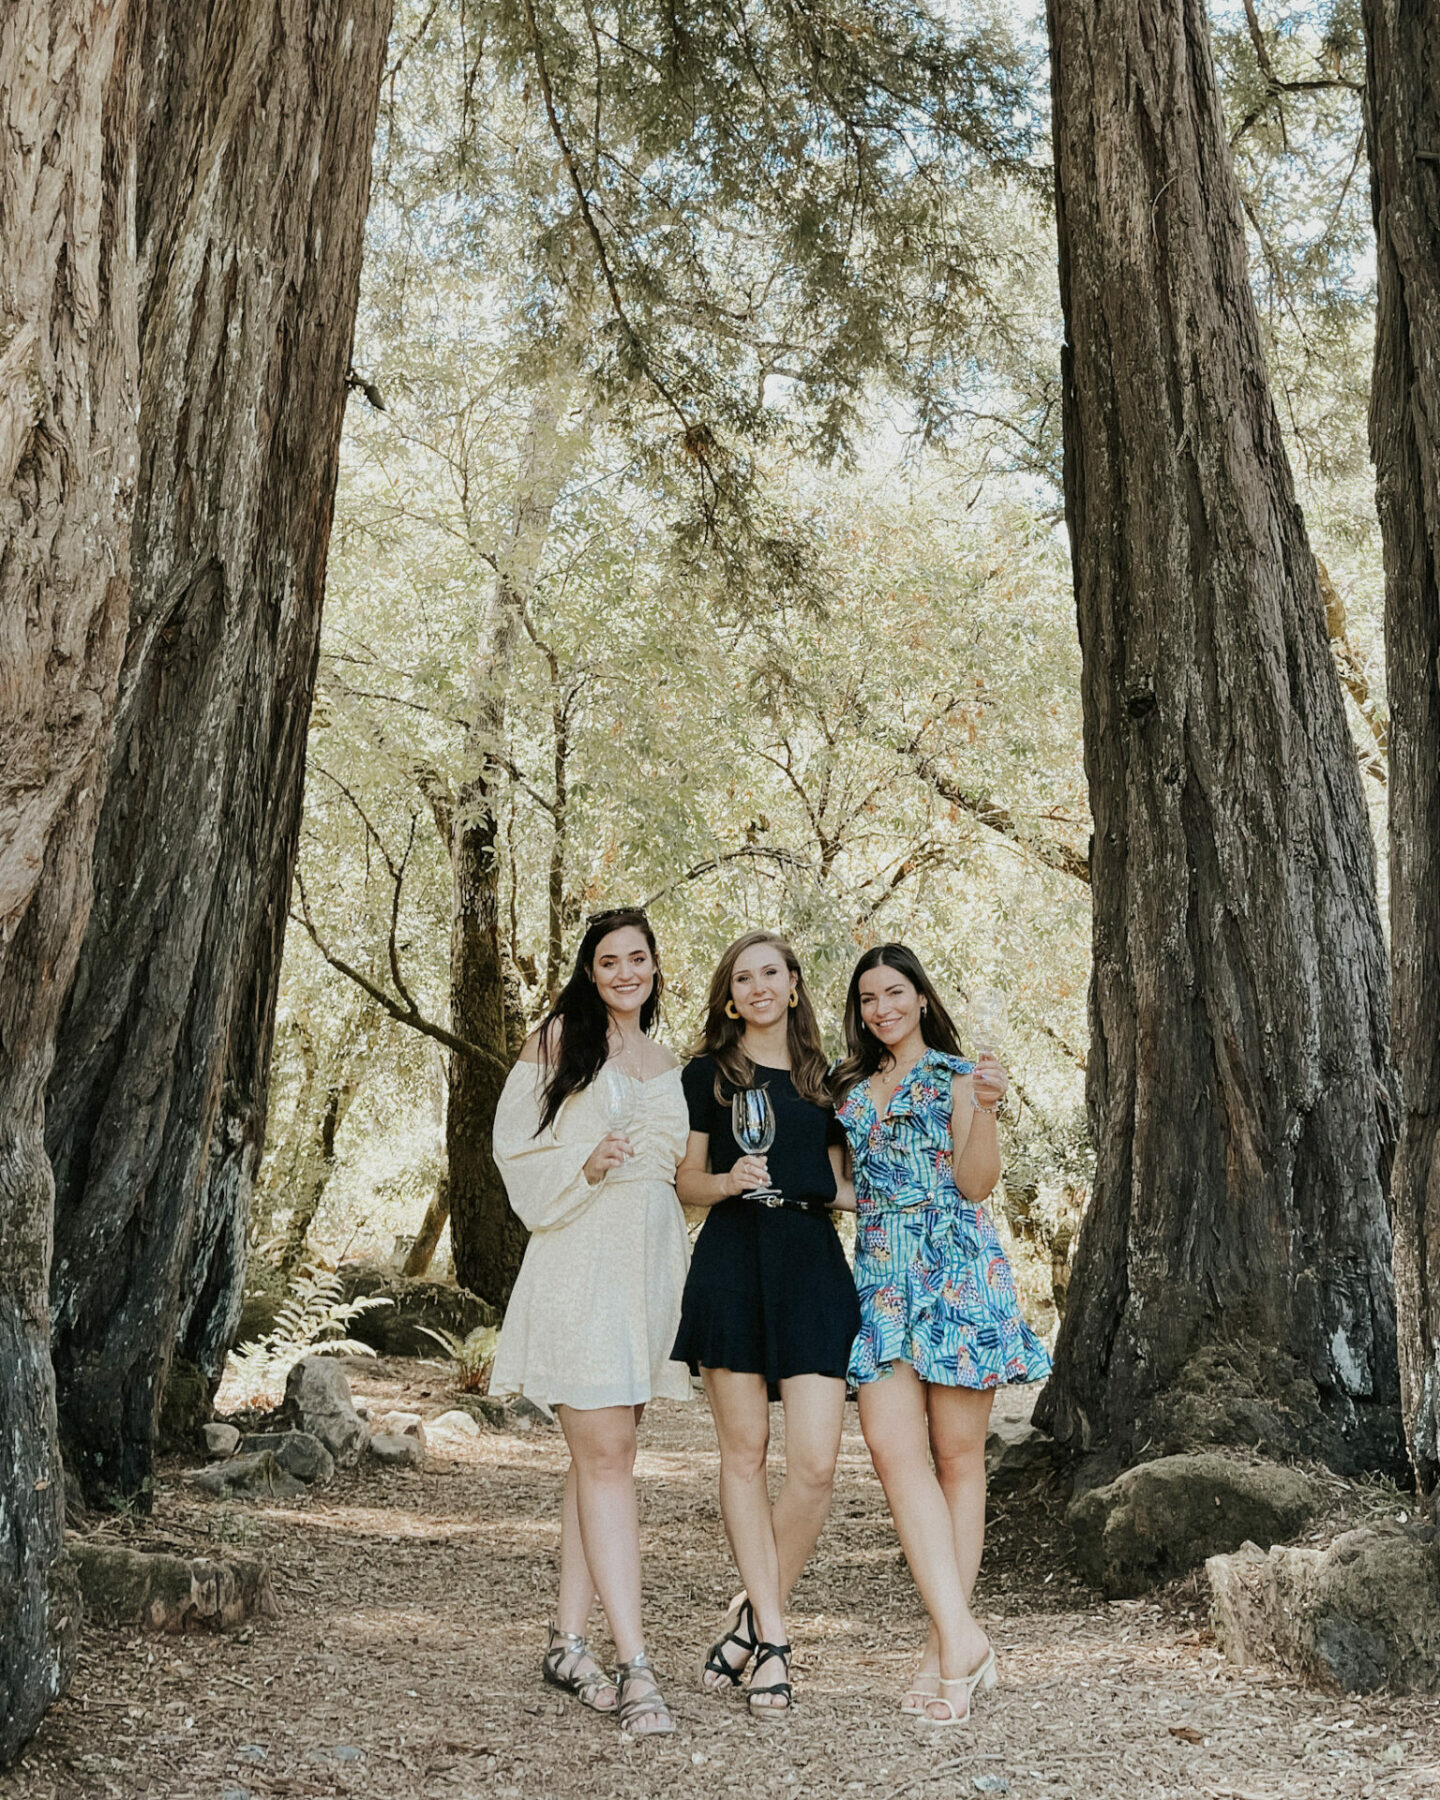 Paige and friends at AXR Winery in a fairy circle of trees